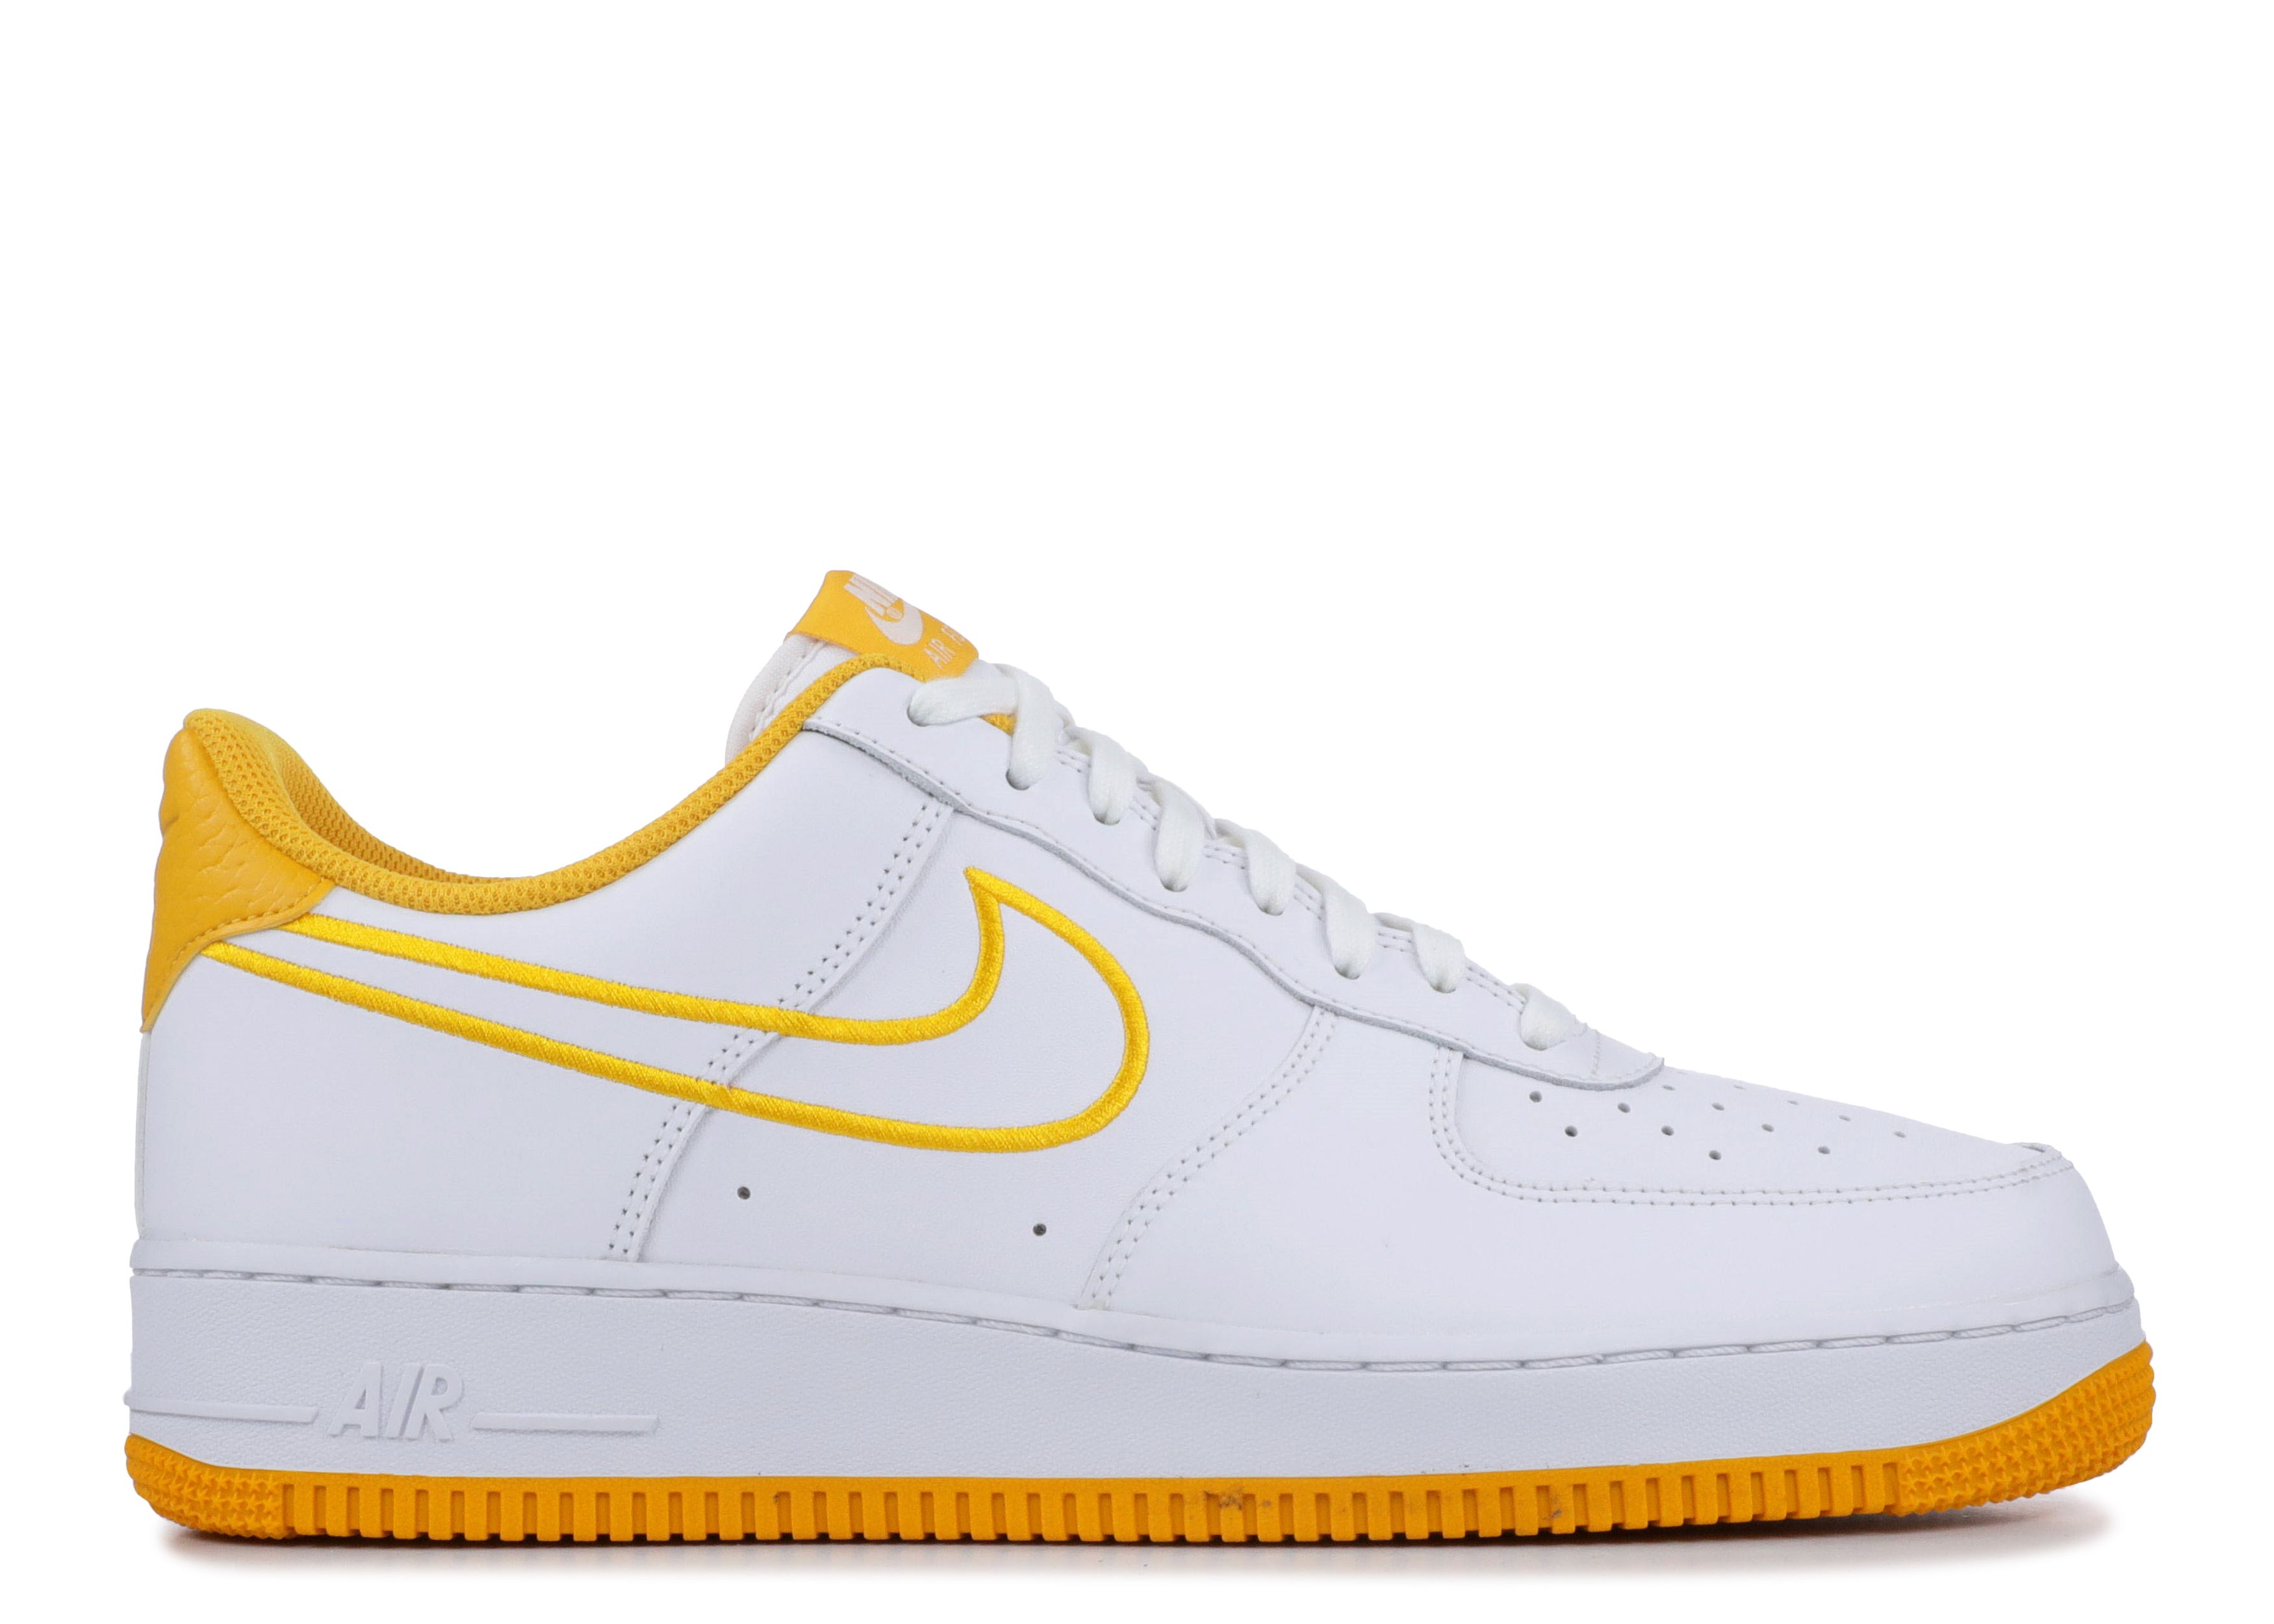 Air Force 1 Low '07 Leather 'Ochre' - Nike - AJ7280 101 - white/yellow ...